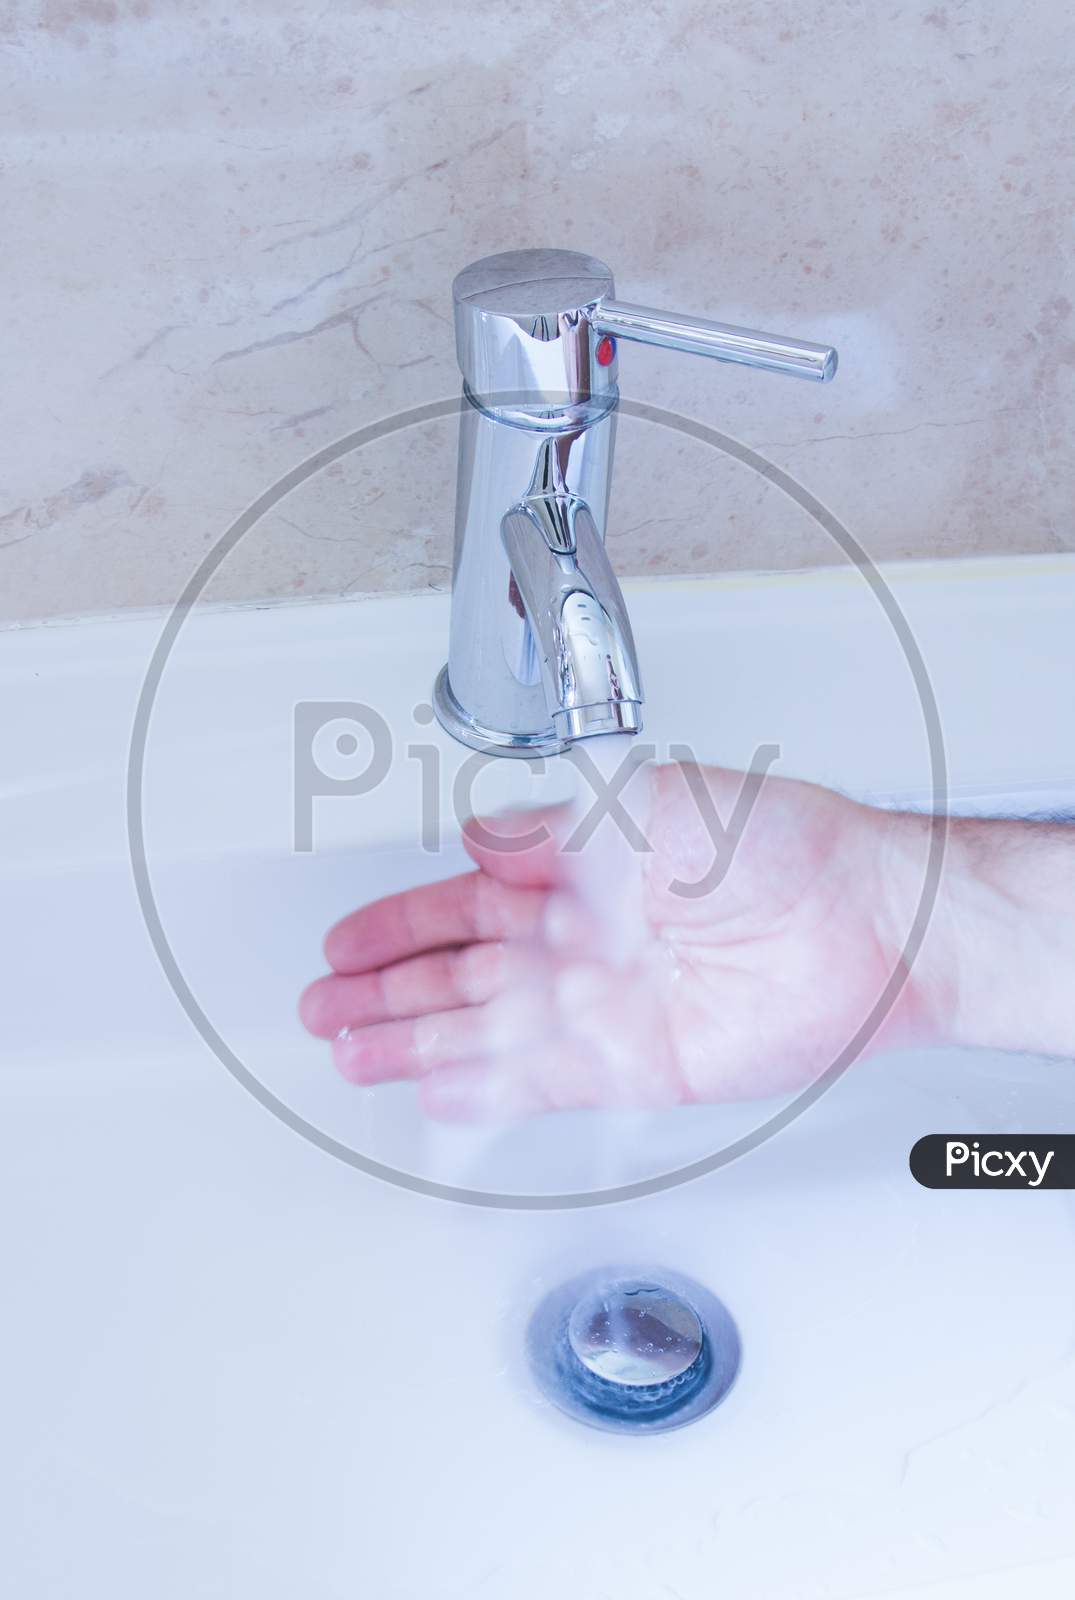 tap with running water, to hand, fight against water waste